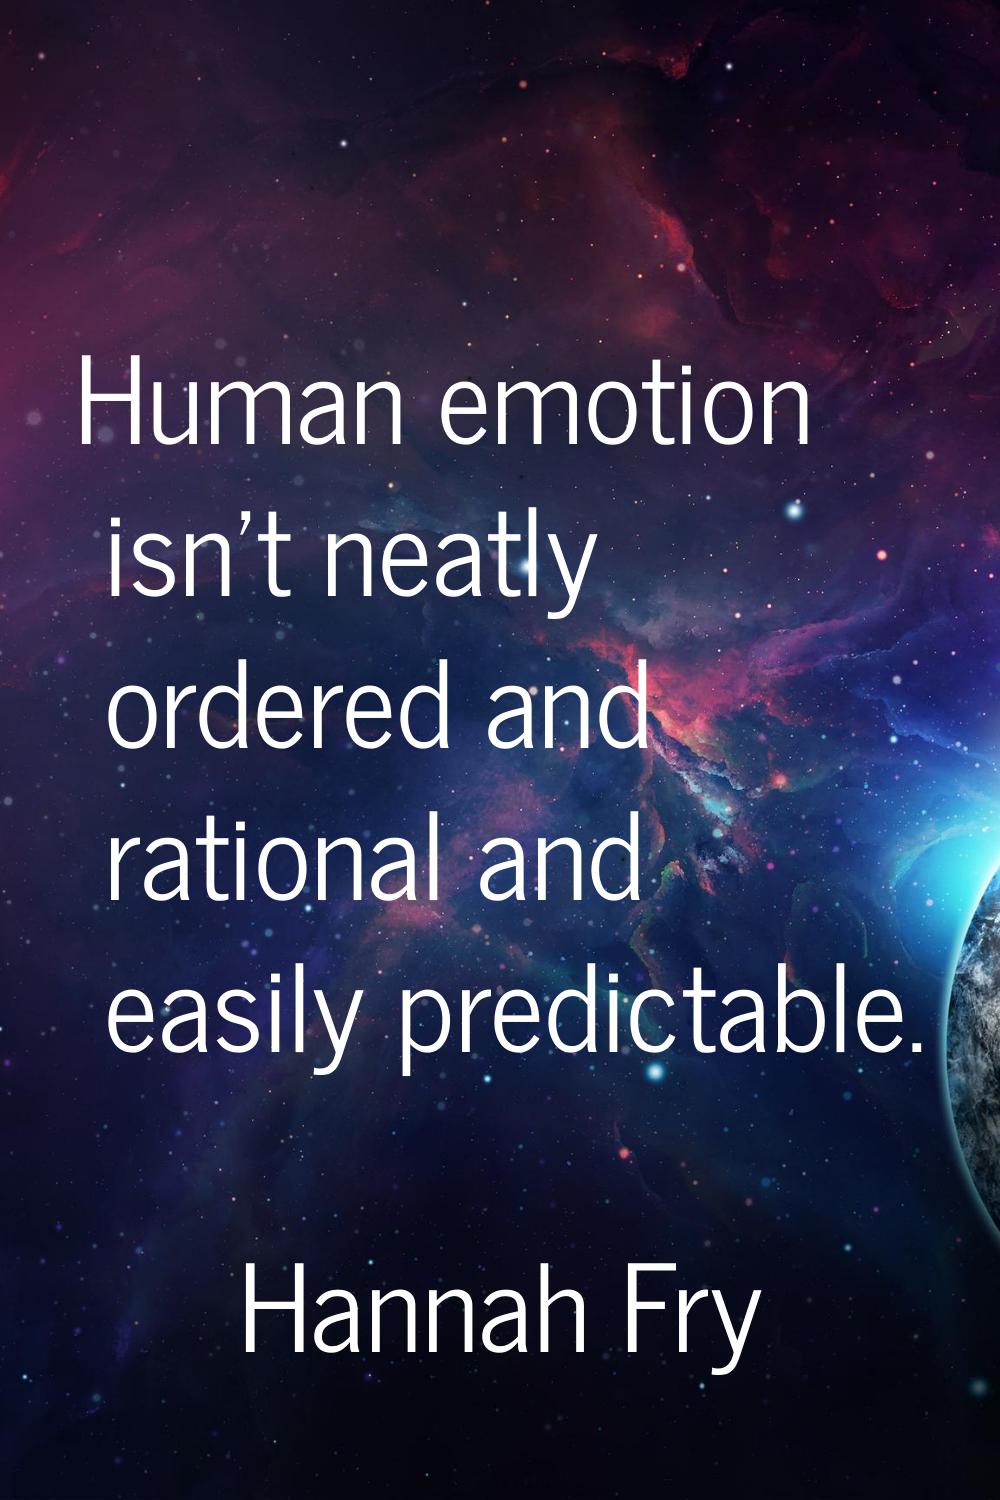 Human emotion isn't neatly ordered and rational and easily predictable.